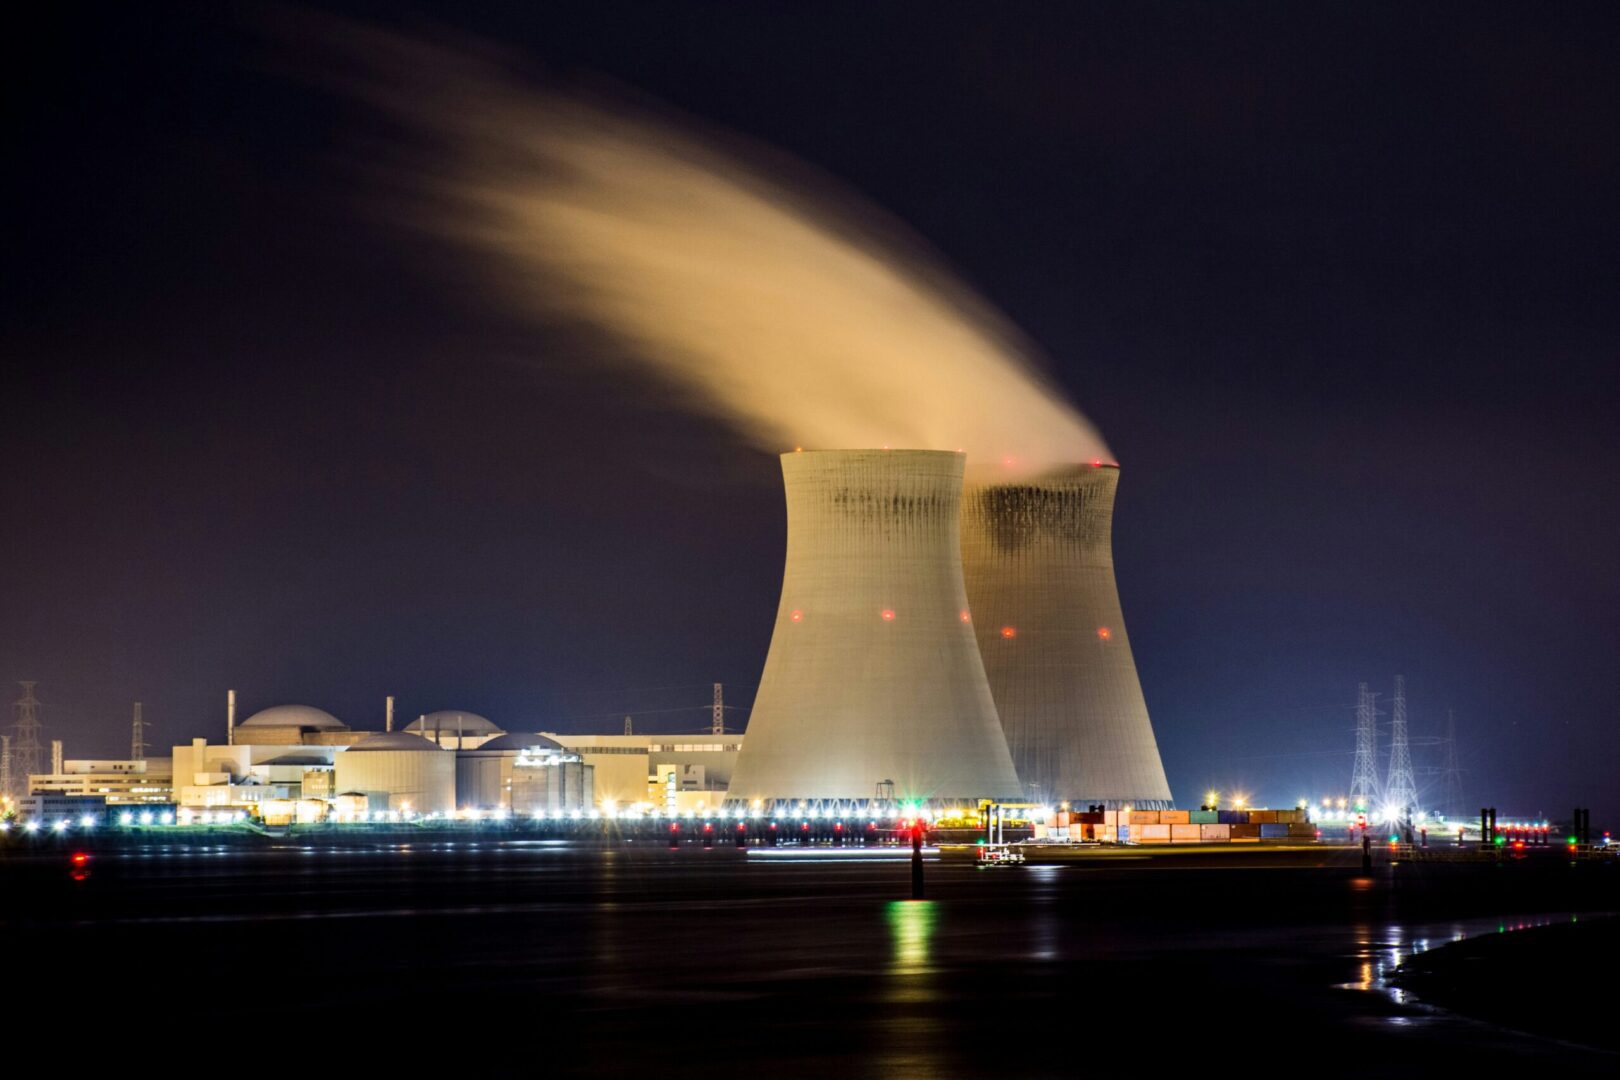 A nuclear power plant at night with smoke coming out of it.